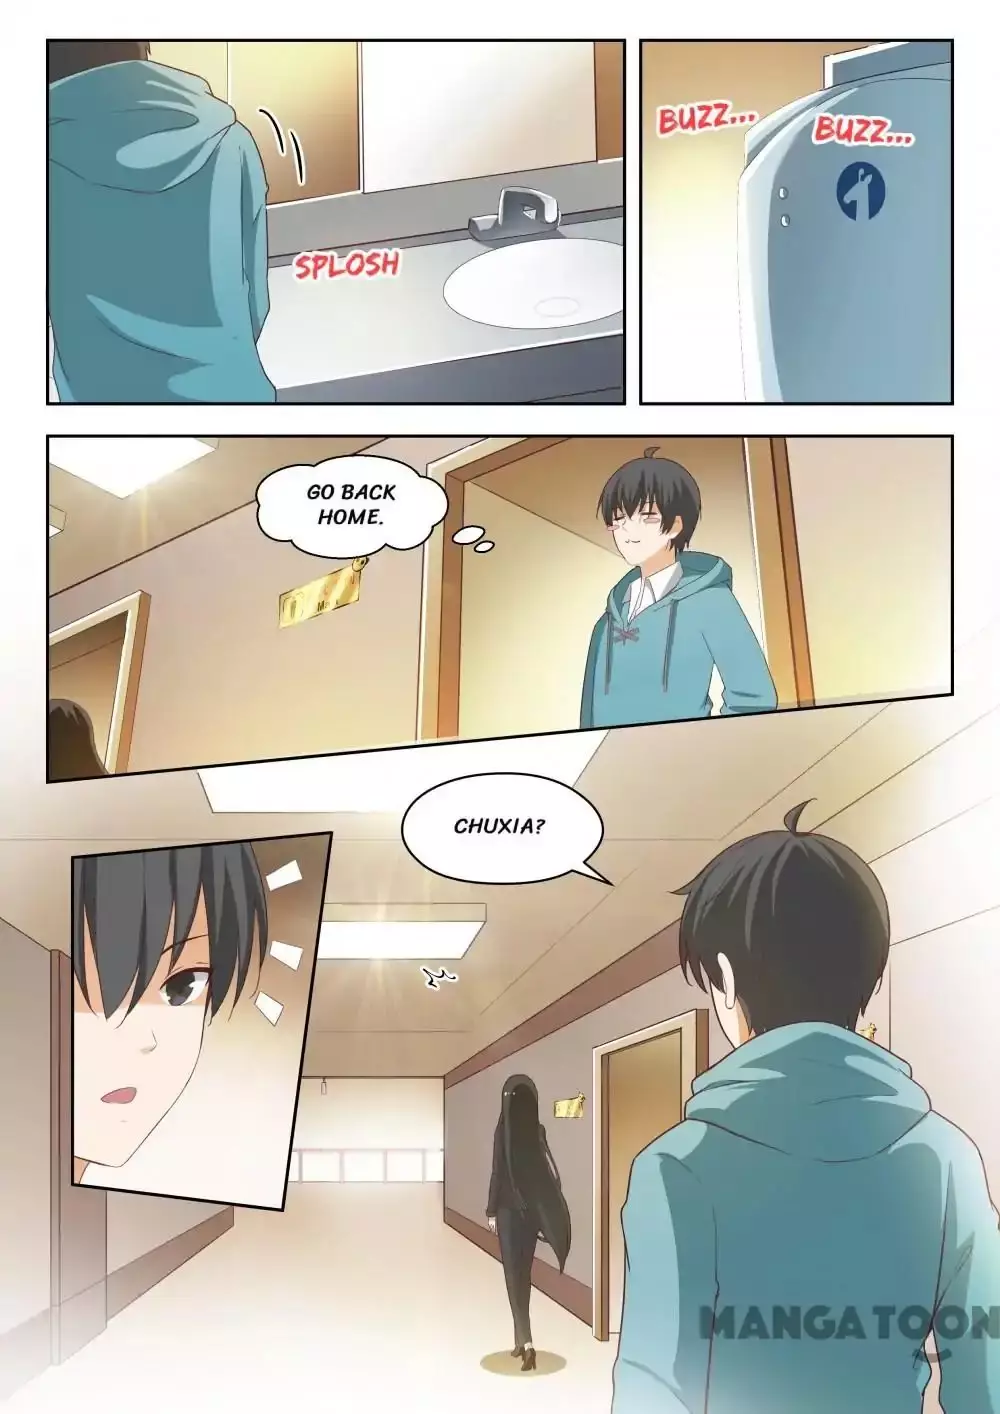 The Boy in the All-Girls School - 206 page 2